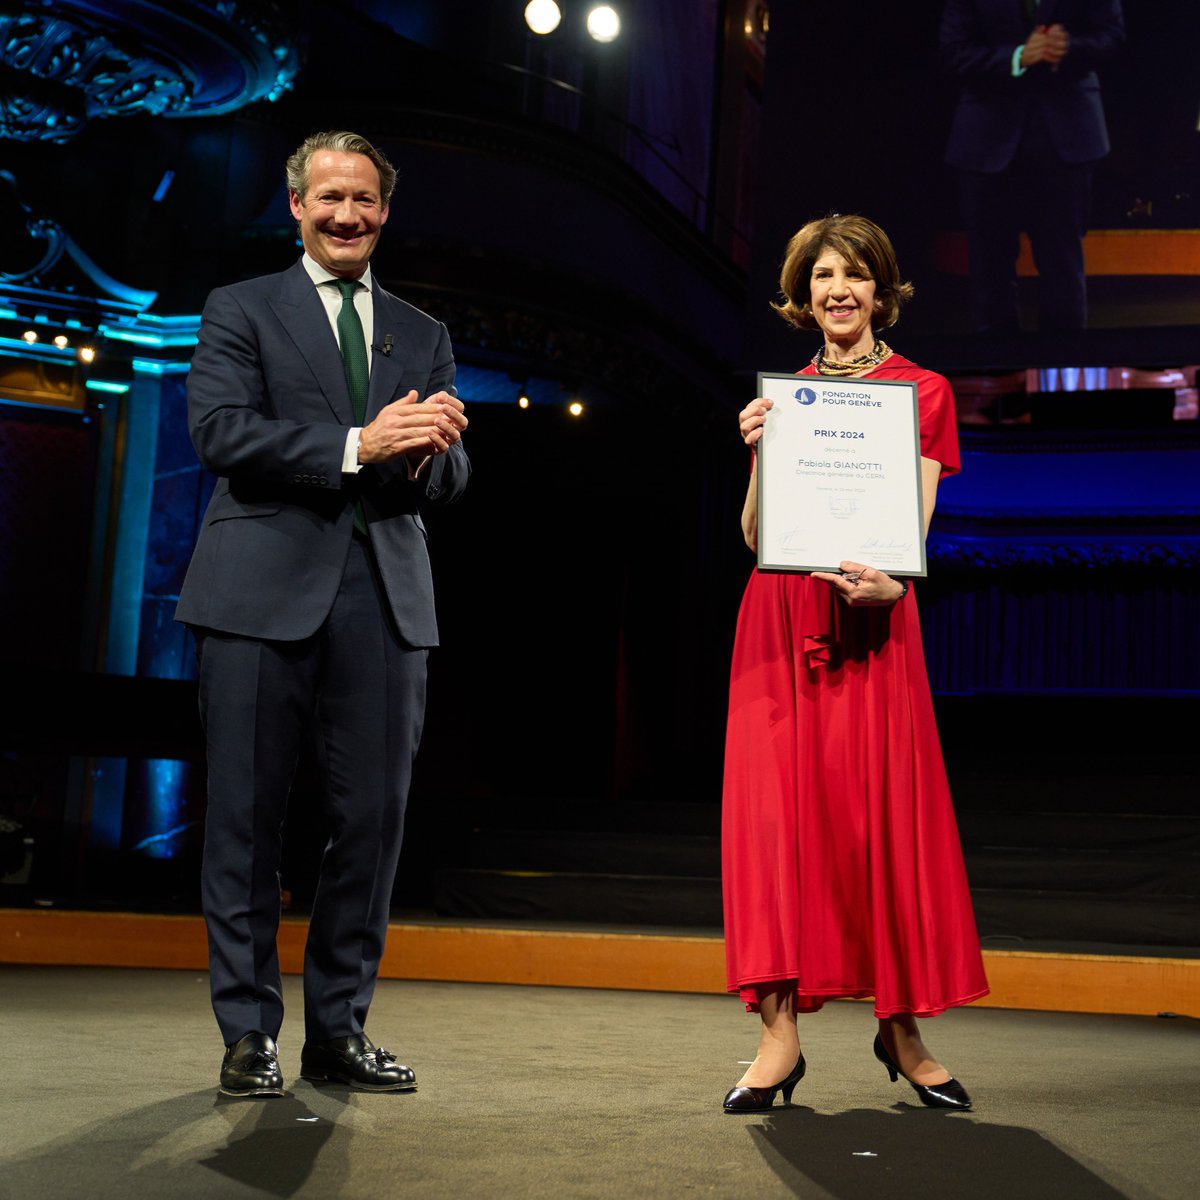 Fabiola Gianotti receives the 2024 prize from the “Fondation pour Genève” “I am very honoured and grateful to receive this prestigious award from the Fondation pour Genève. CERN’s mission and values, such as promoting scientific research and technological development, training